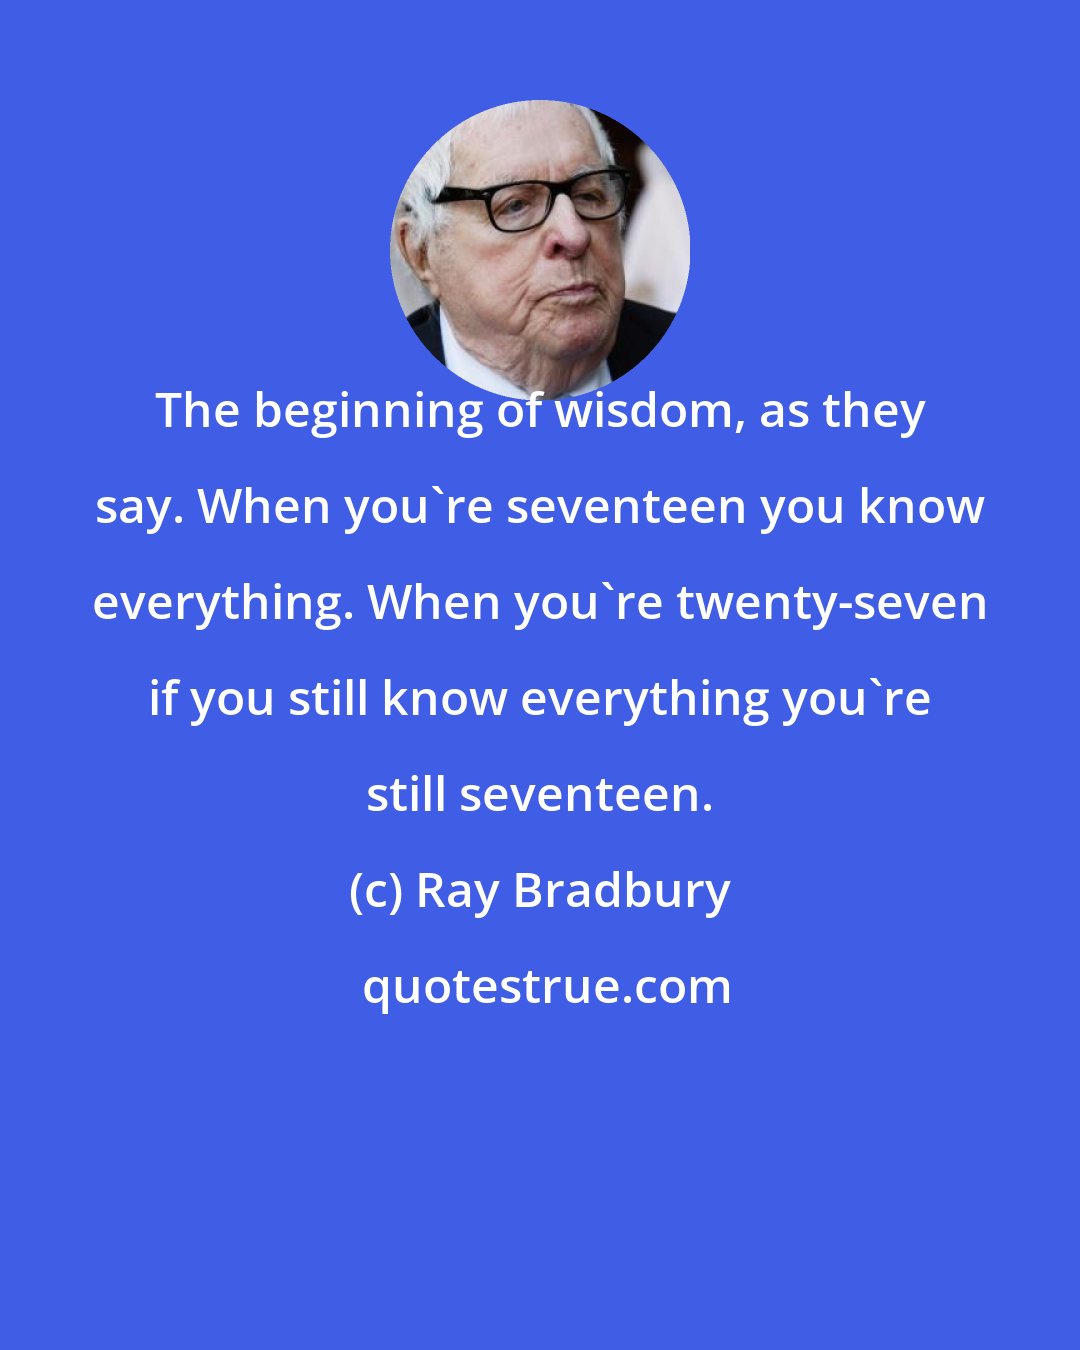 Ray Bradbury: The beginning of wisdom, as they say. When you're seventeen you know everything. When you're twenty-seven if you still know everything you're still seventeen.